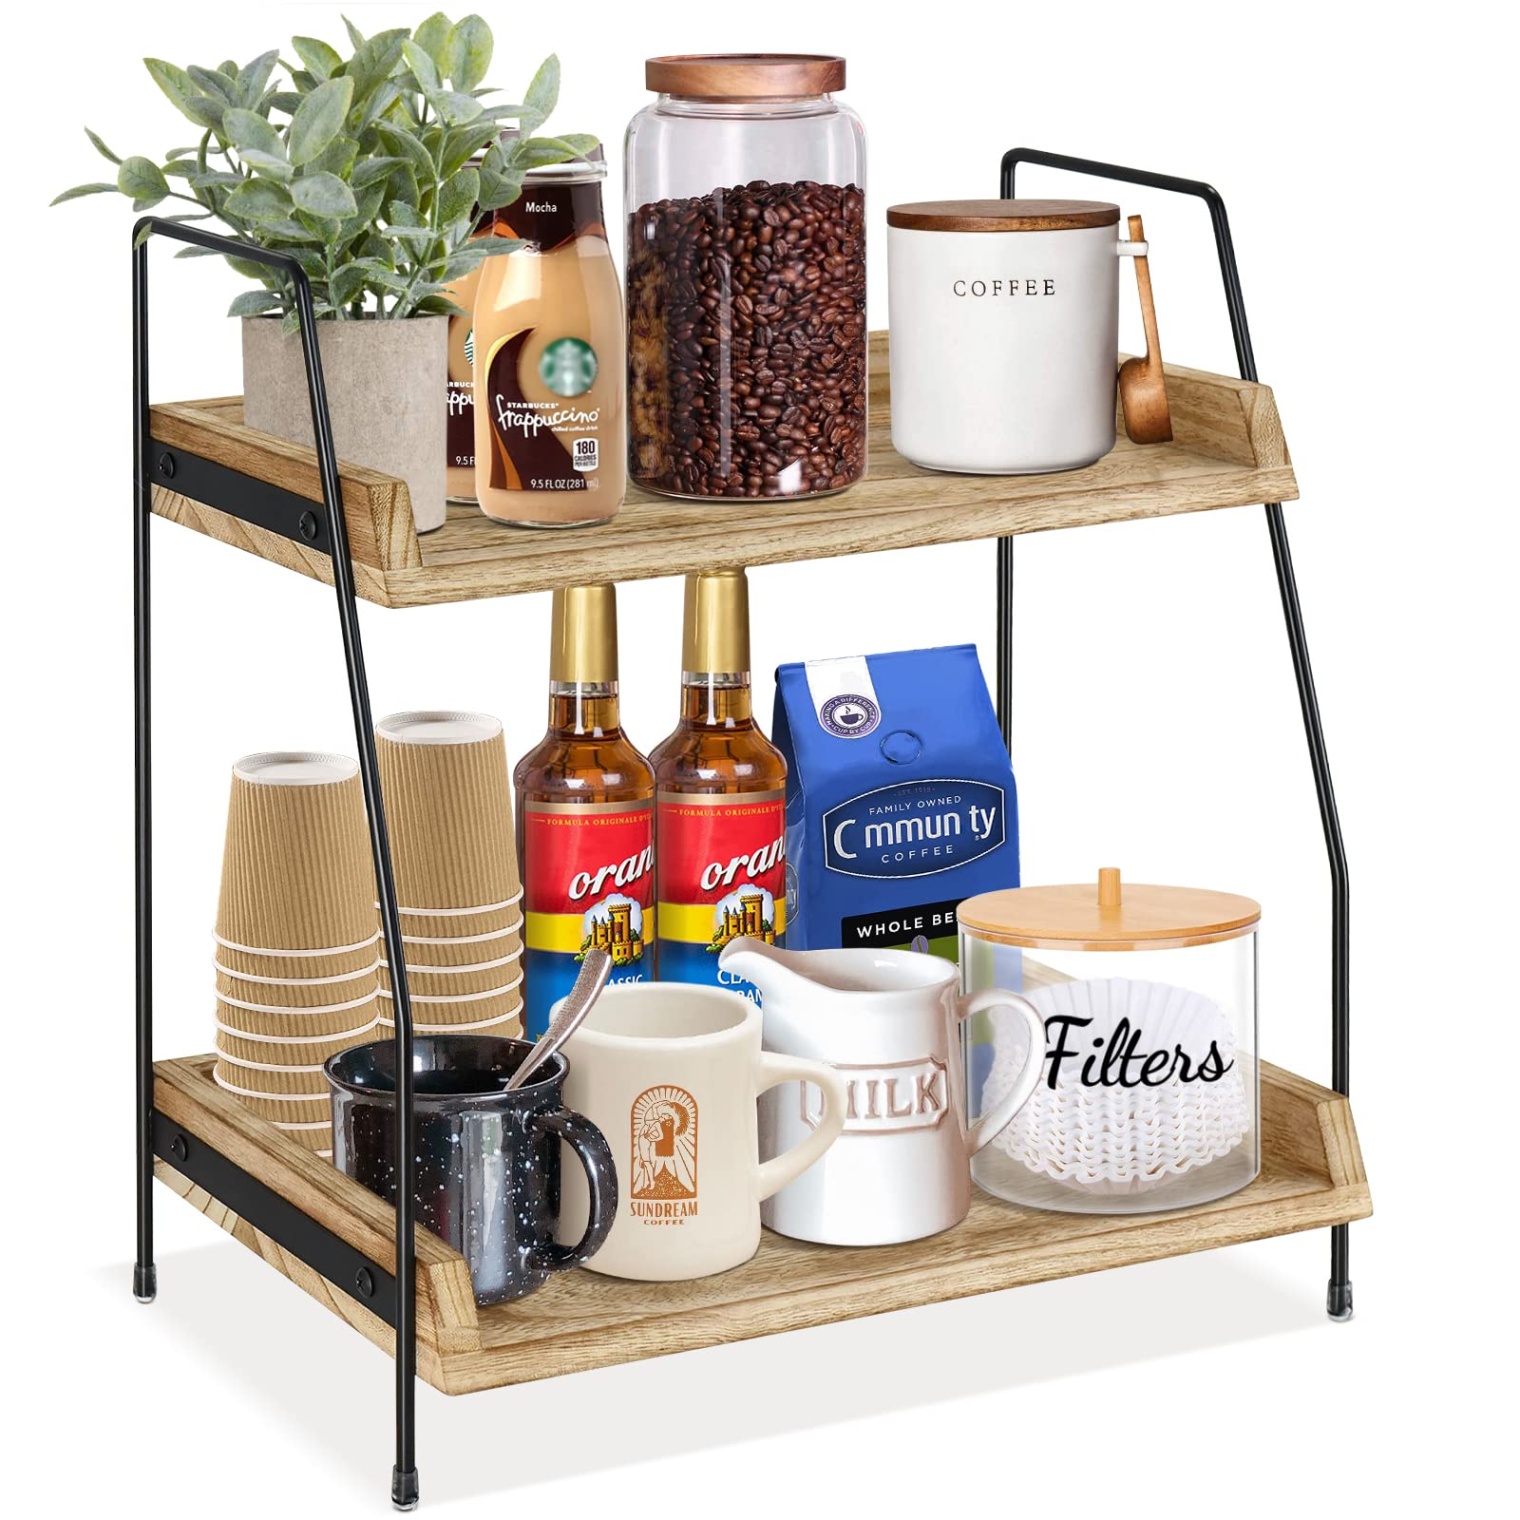 accessories for coffee bar Bulan 2 Coffee Bar Accessories and Organizer Countertop, Coffee Station Organizer  Kitchen Counter Shelf Organizer,Coffee Condiment Storage,Cup Lid Holder